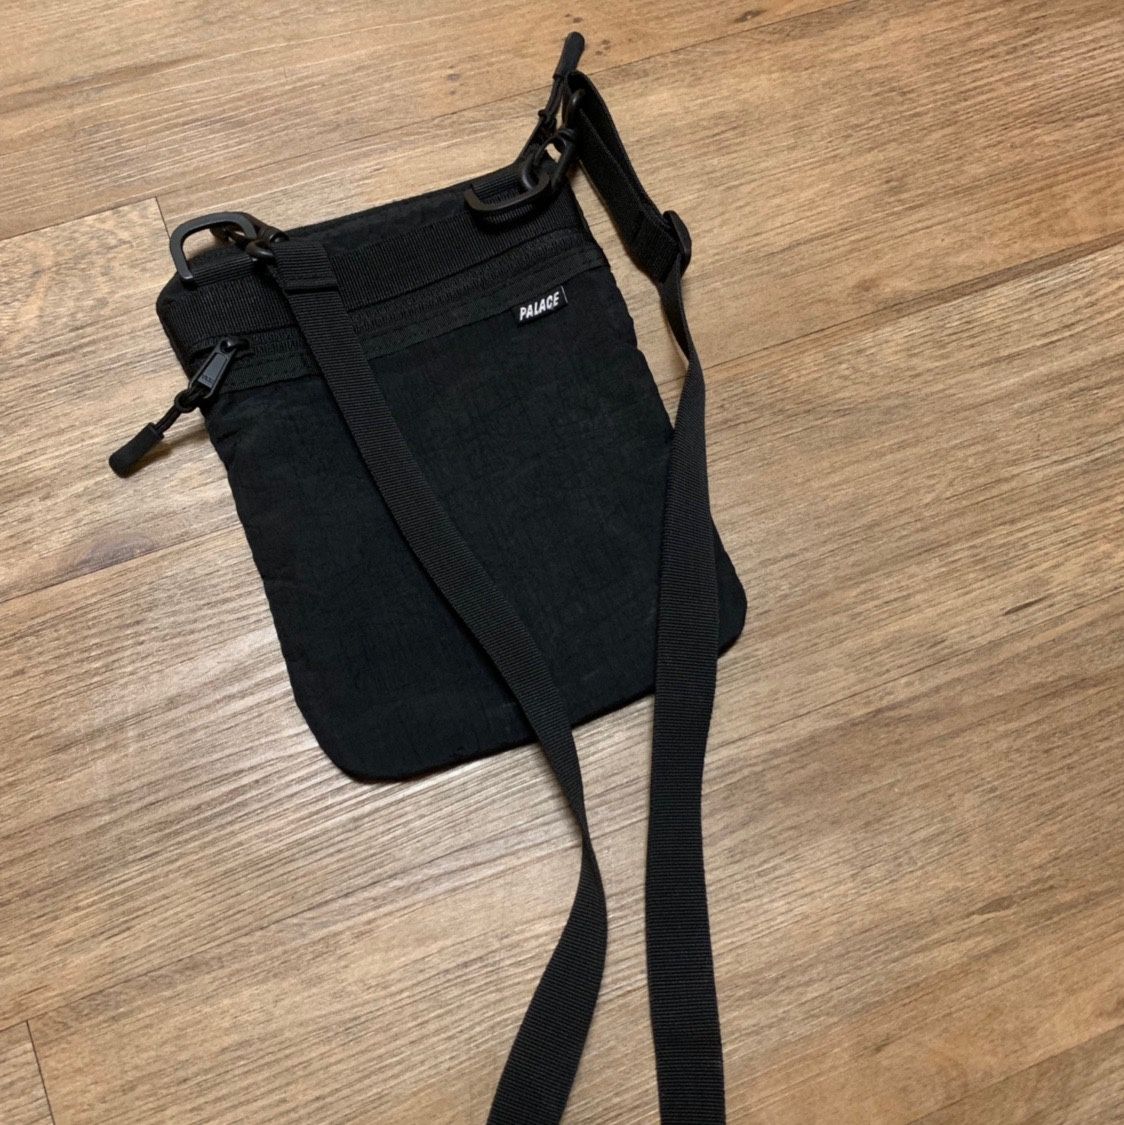 Dereon Purse for Sale in French Camp, CA - OfferUp